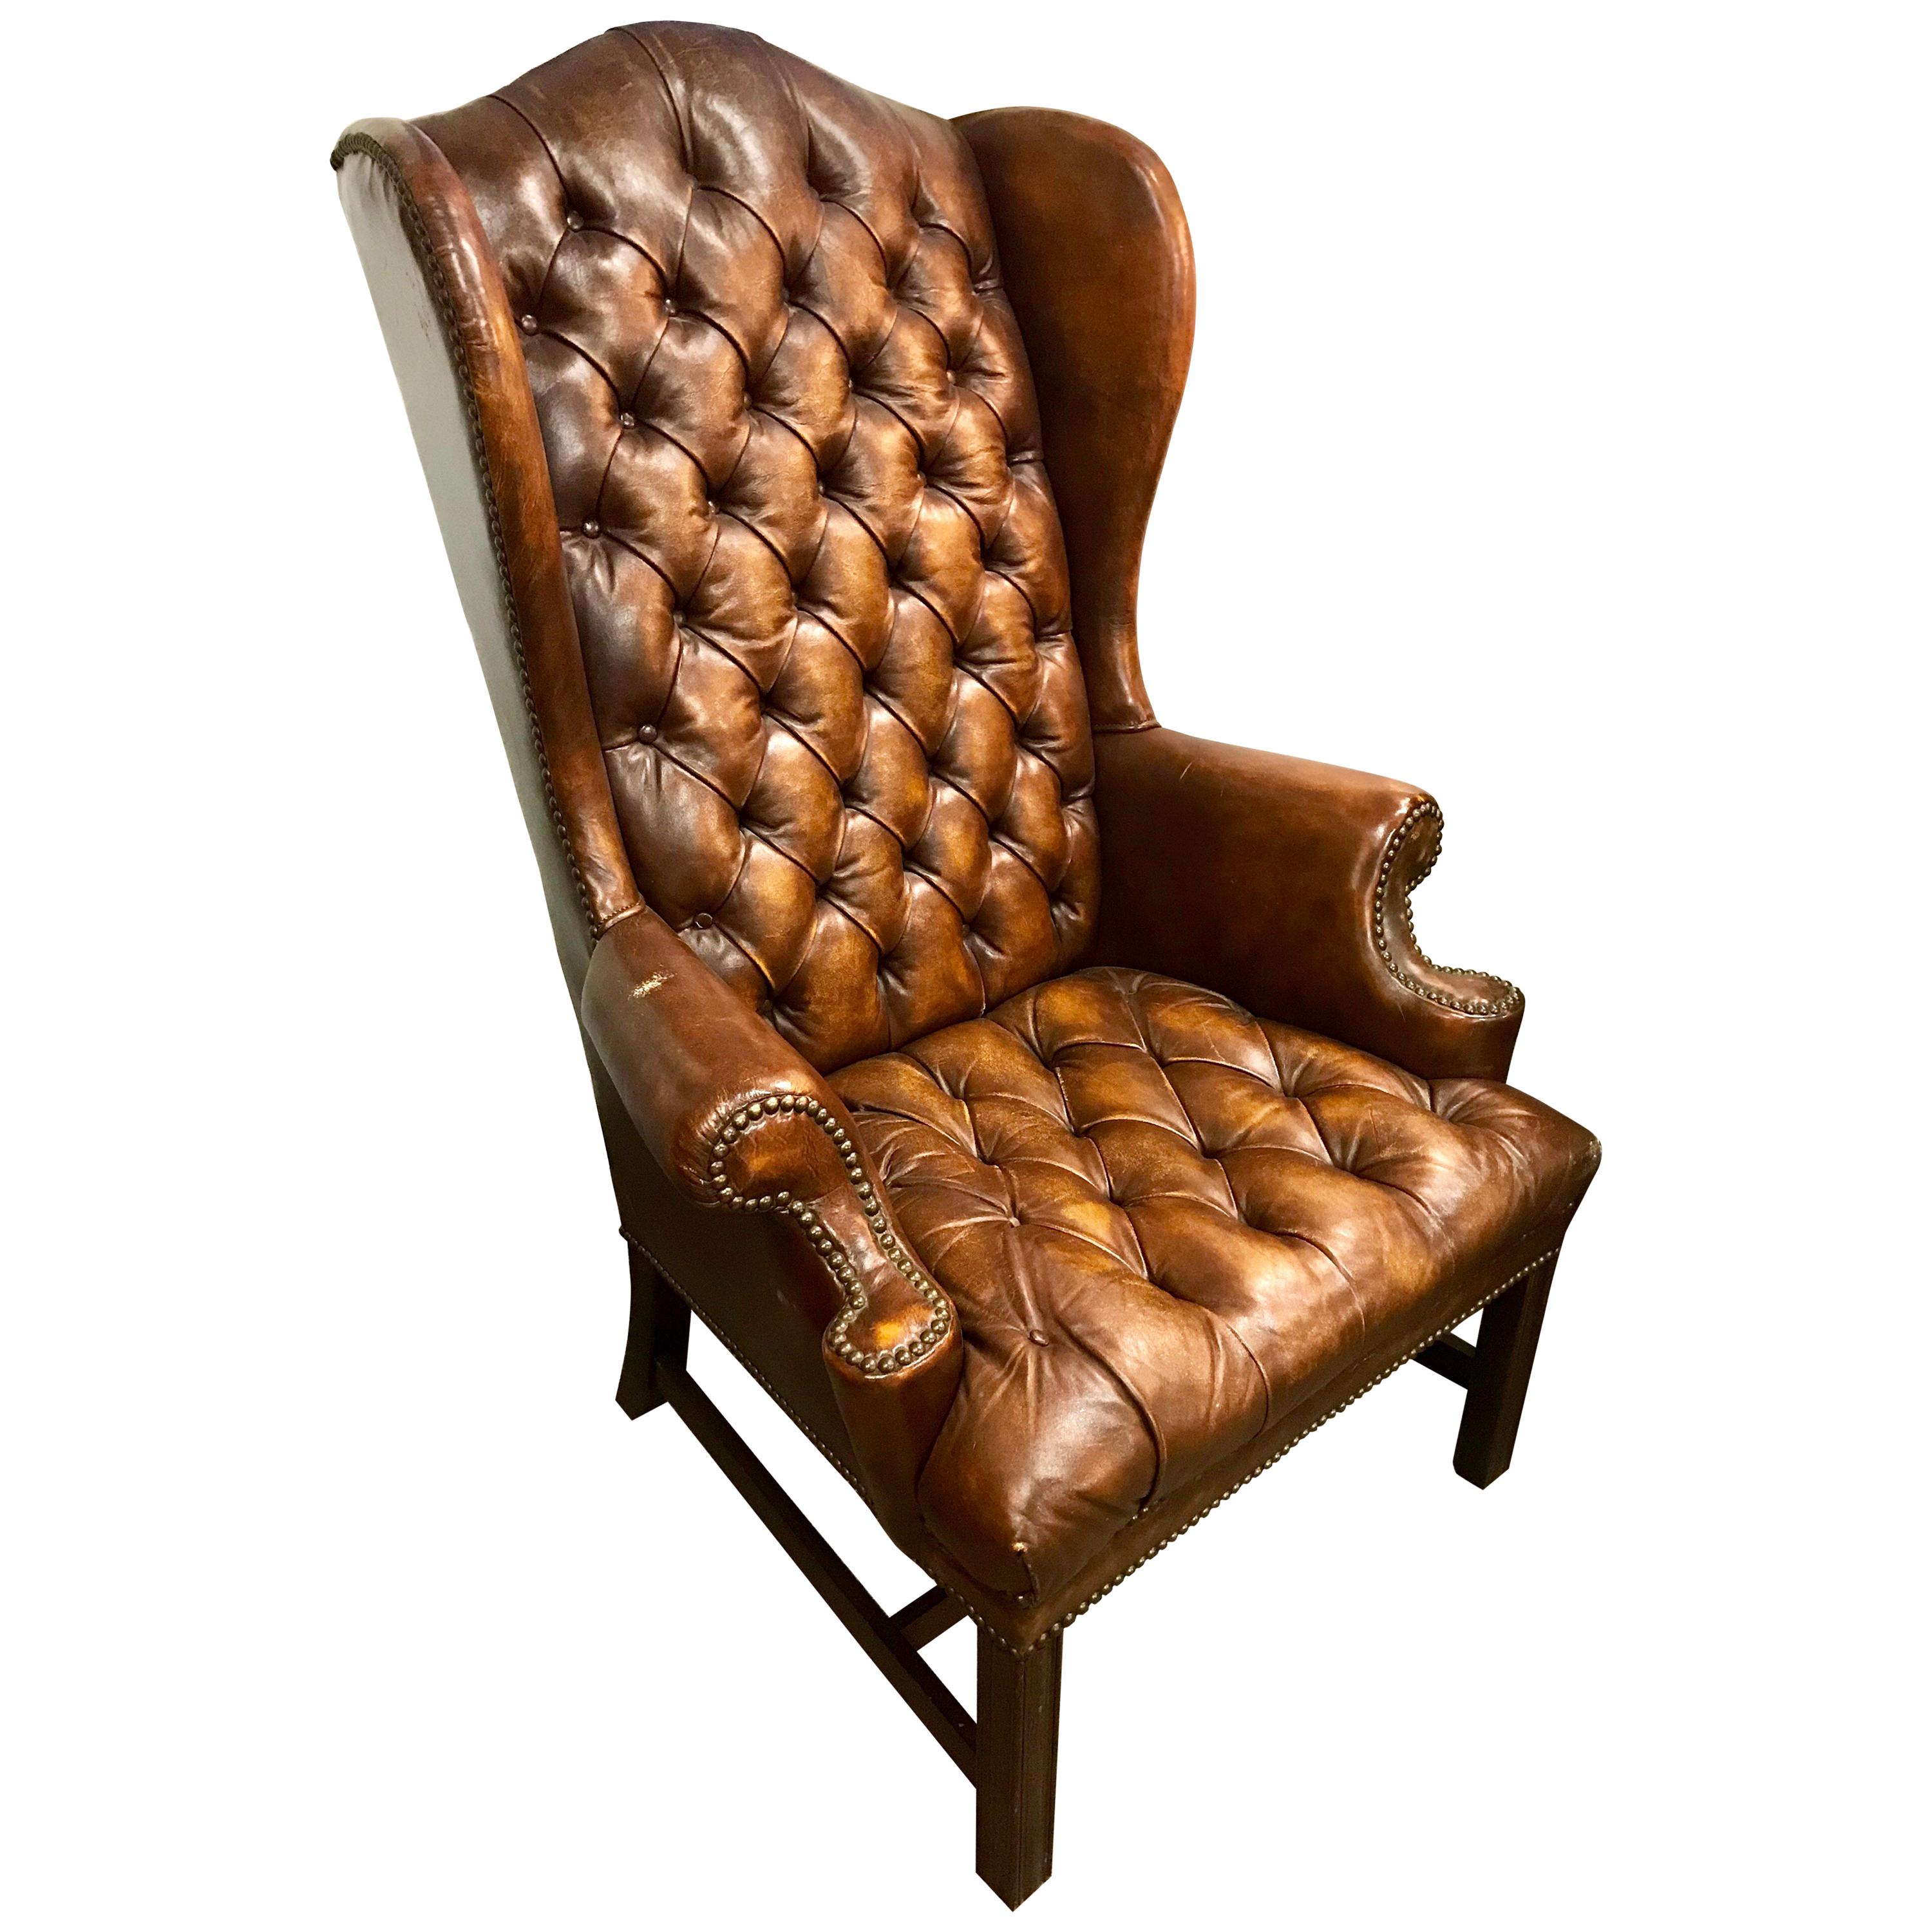 English Brown Leather Tufted Chesterfield Wingback Chair